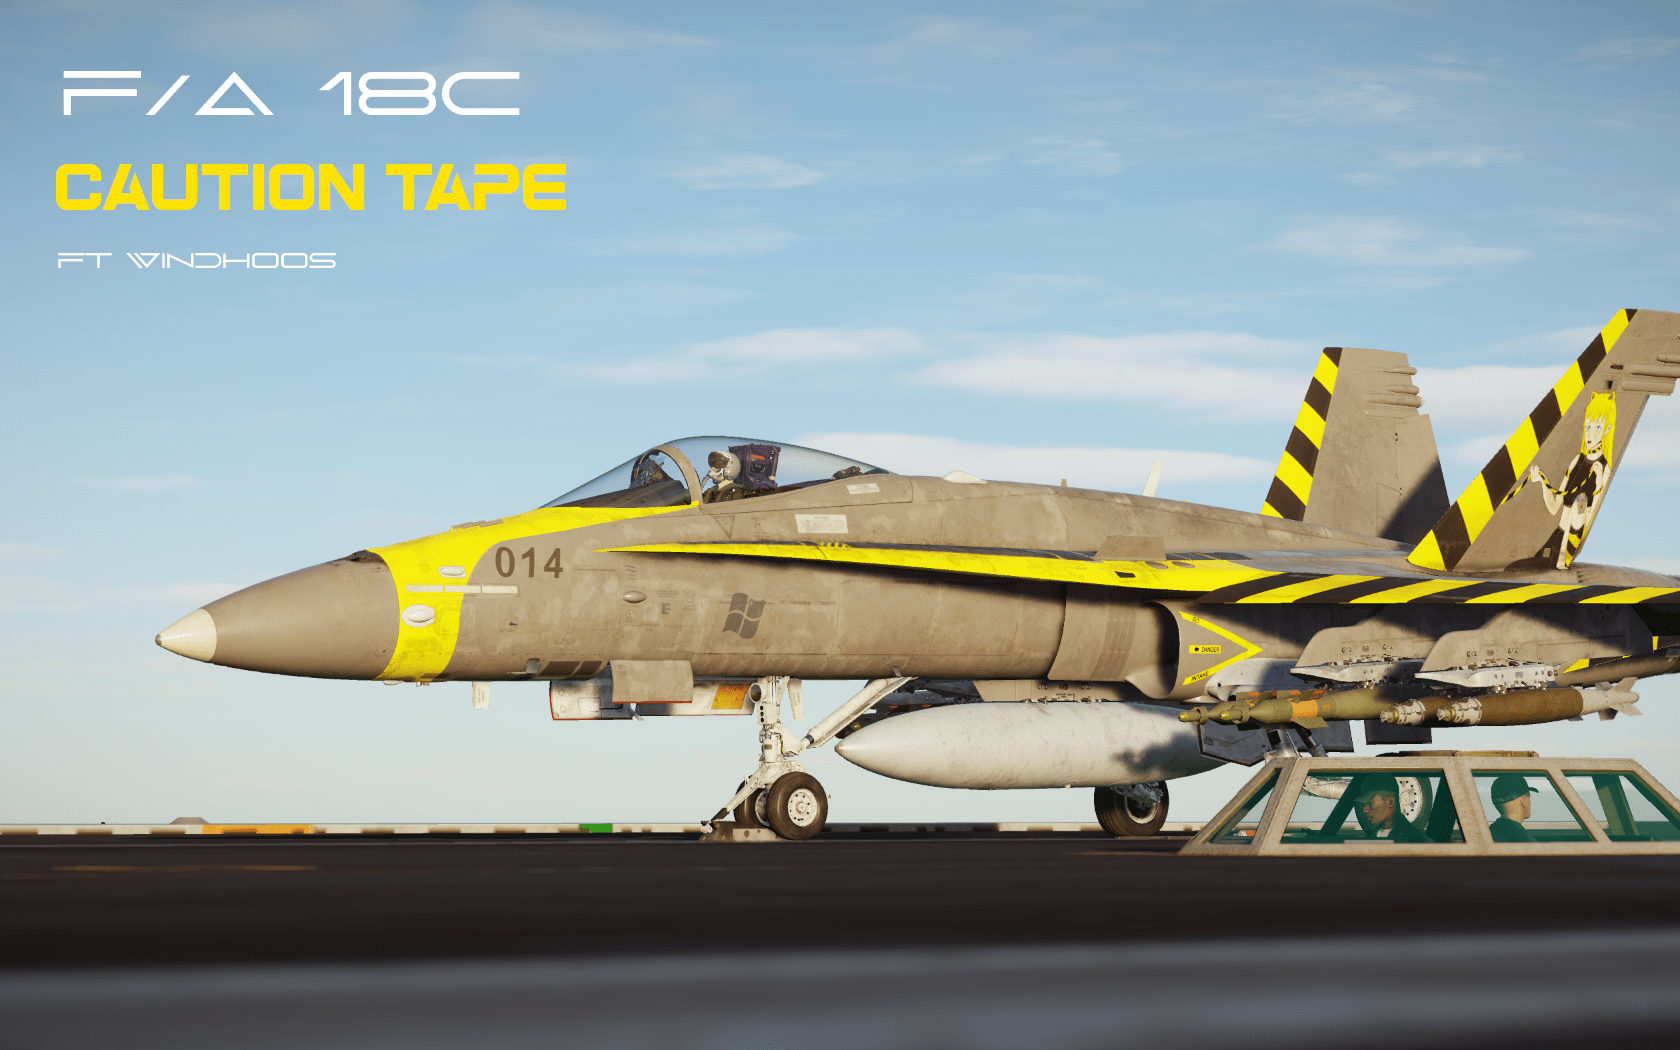 F/A-18c Windhoos Caution tape